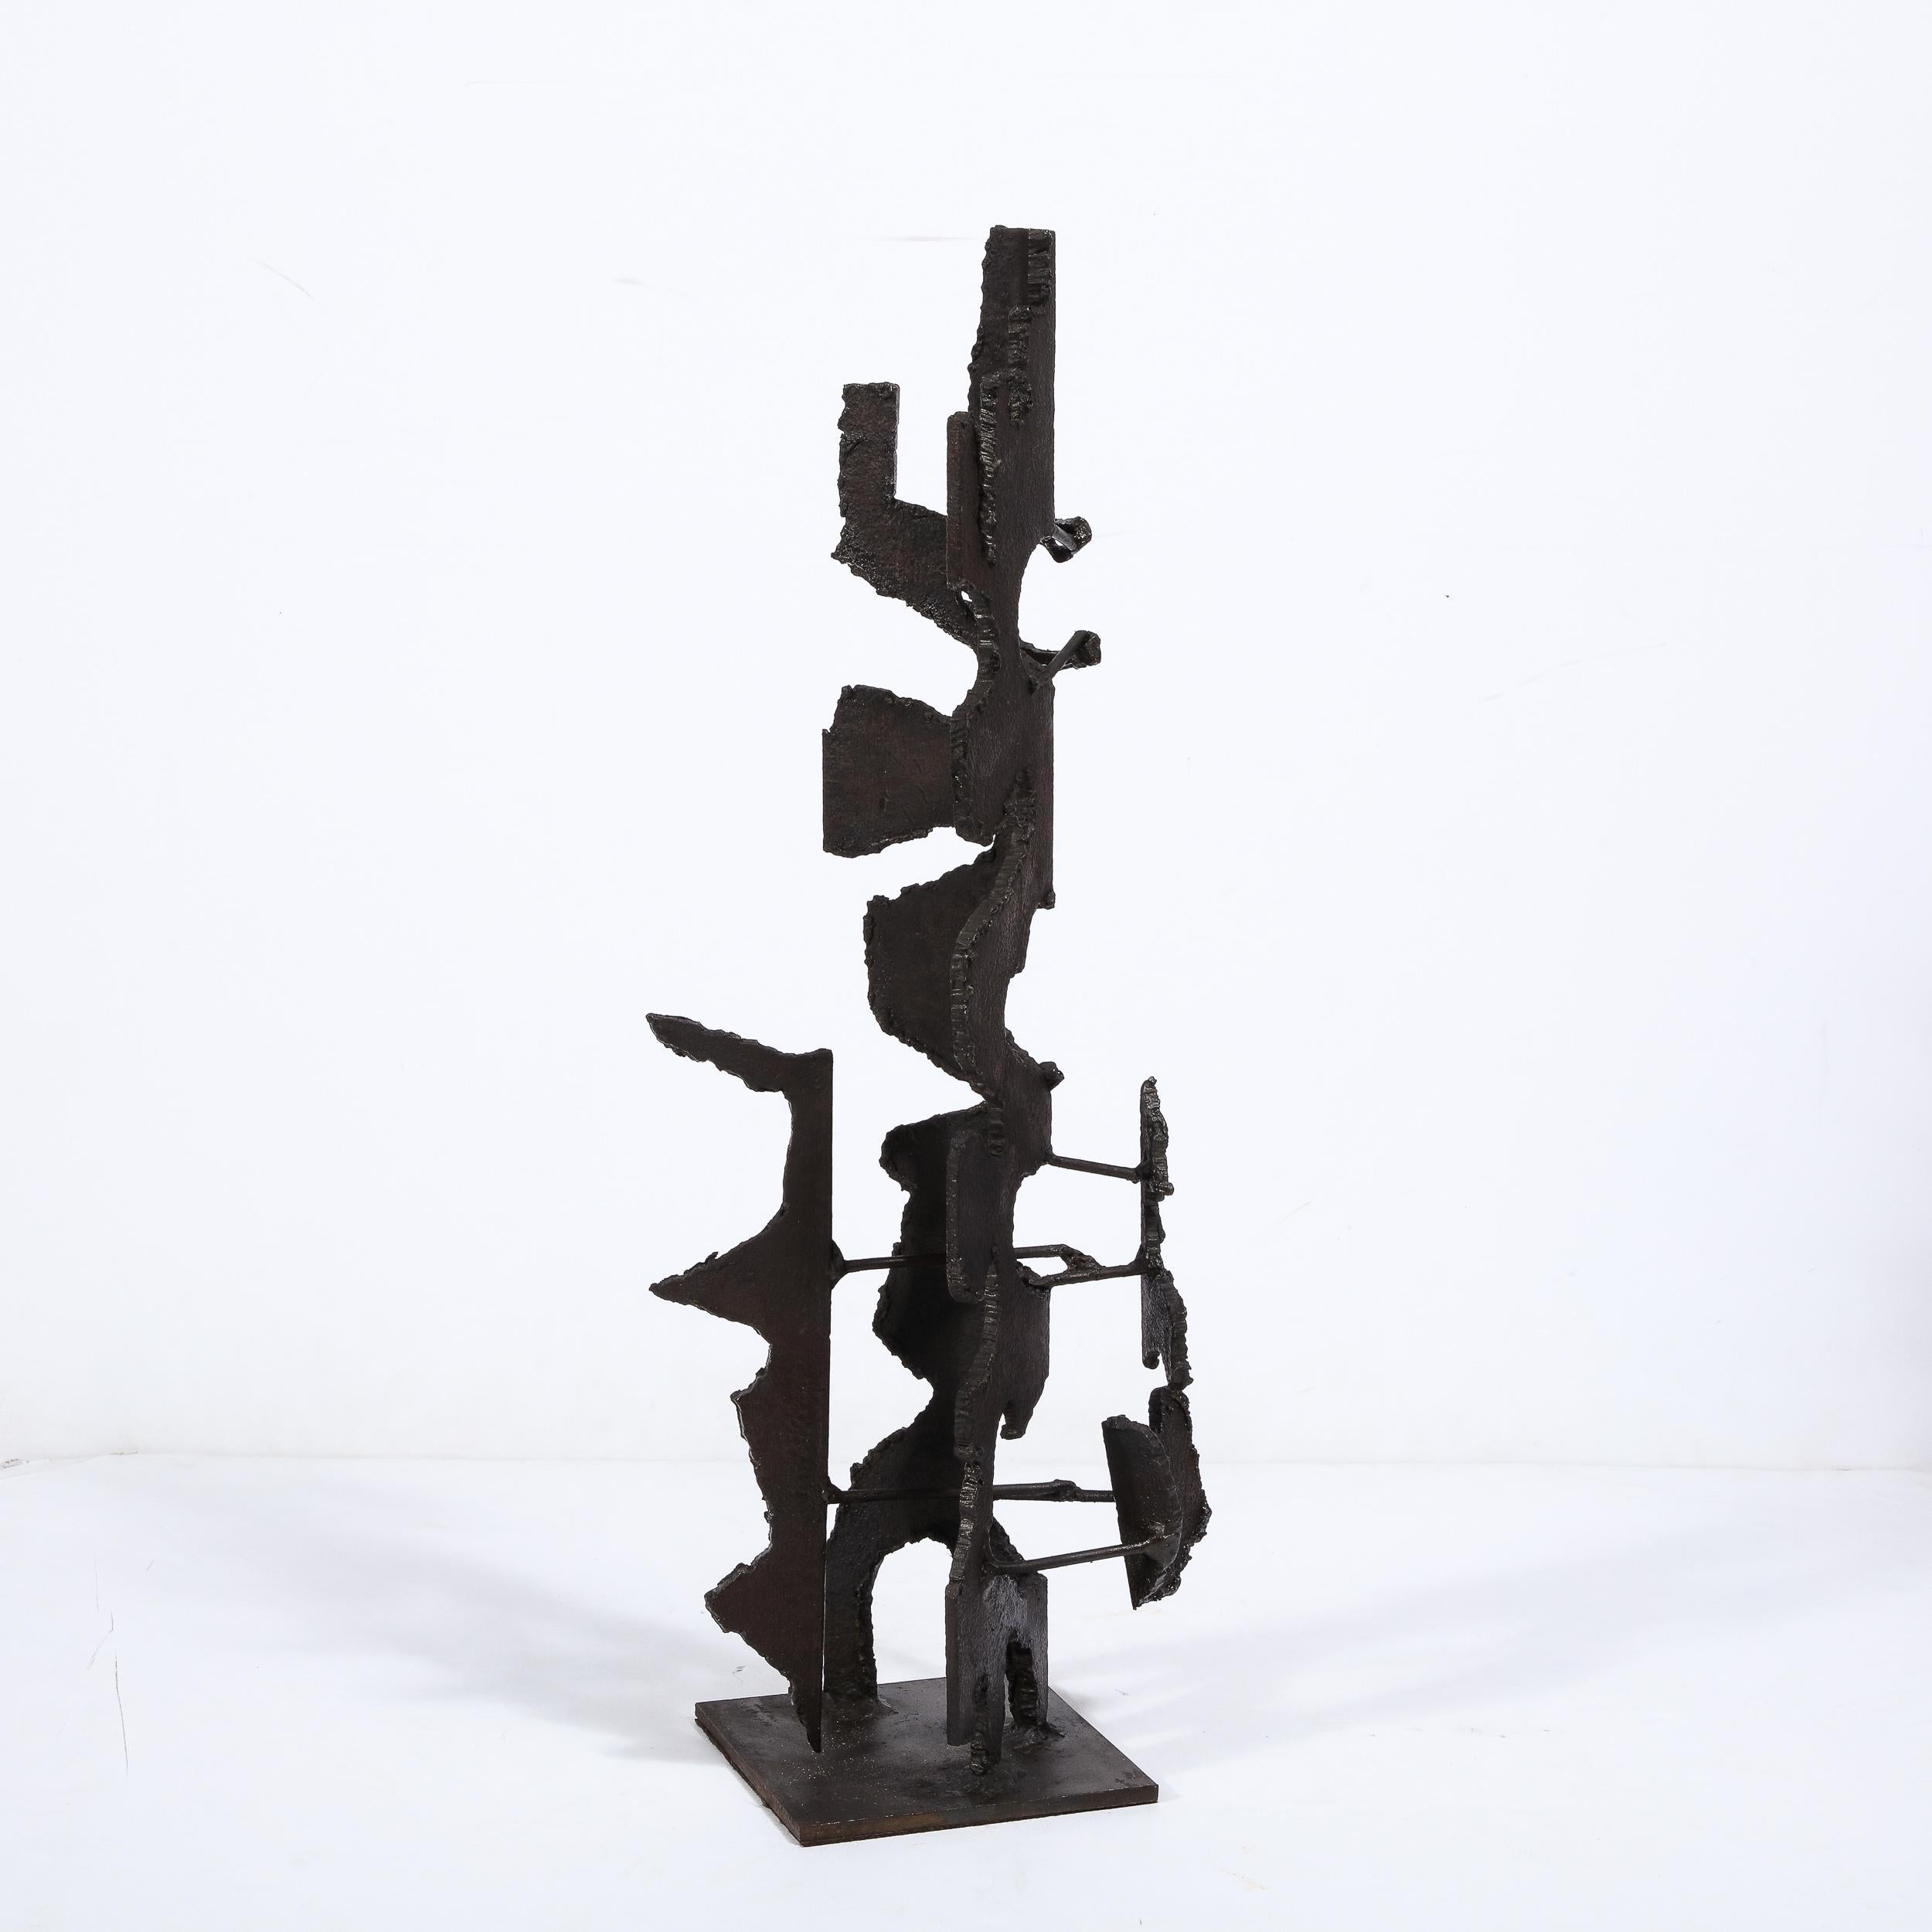 Brutalist Steel Sculpture in Oil and Waxed Finish by Jan Van Deckter For Sale 4